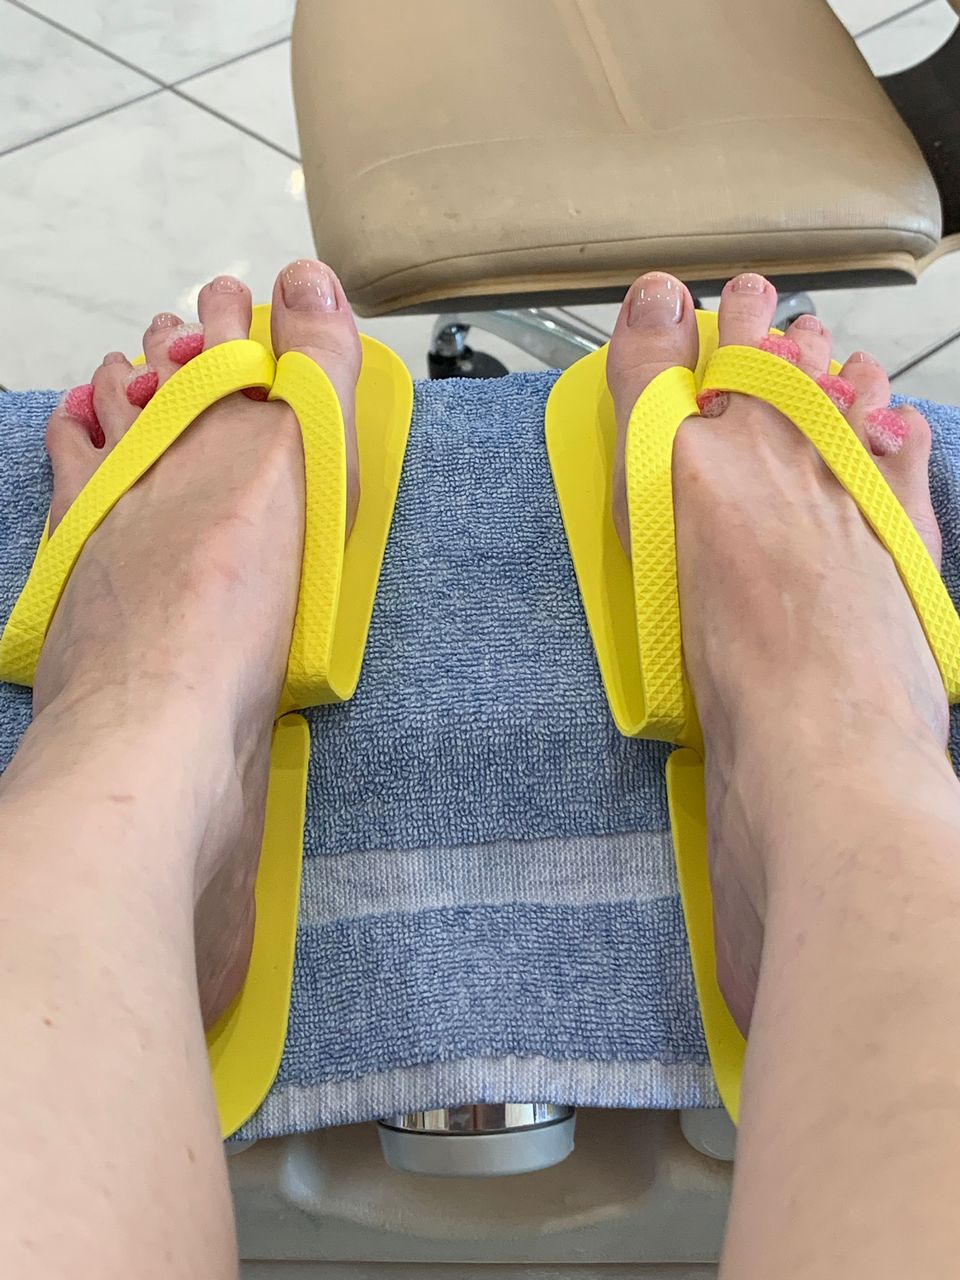 Toes Pixie Pink Pedicure